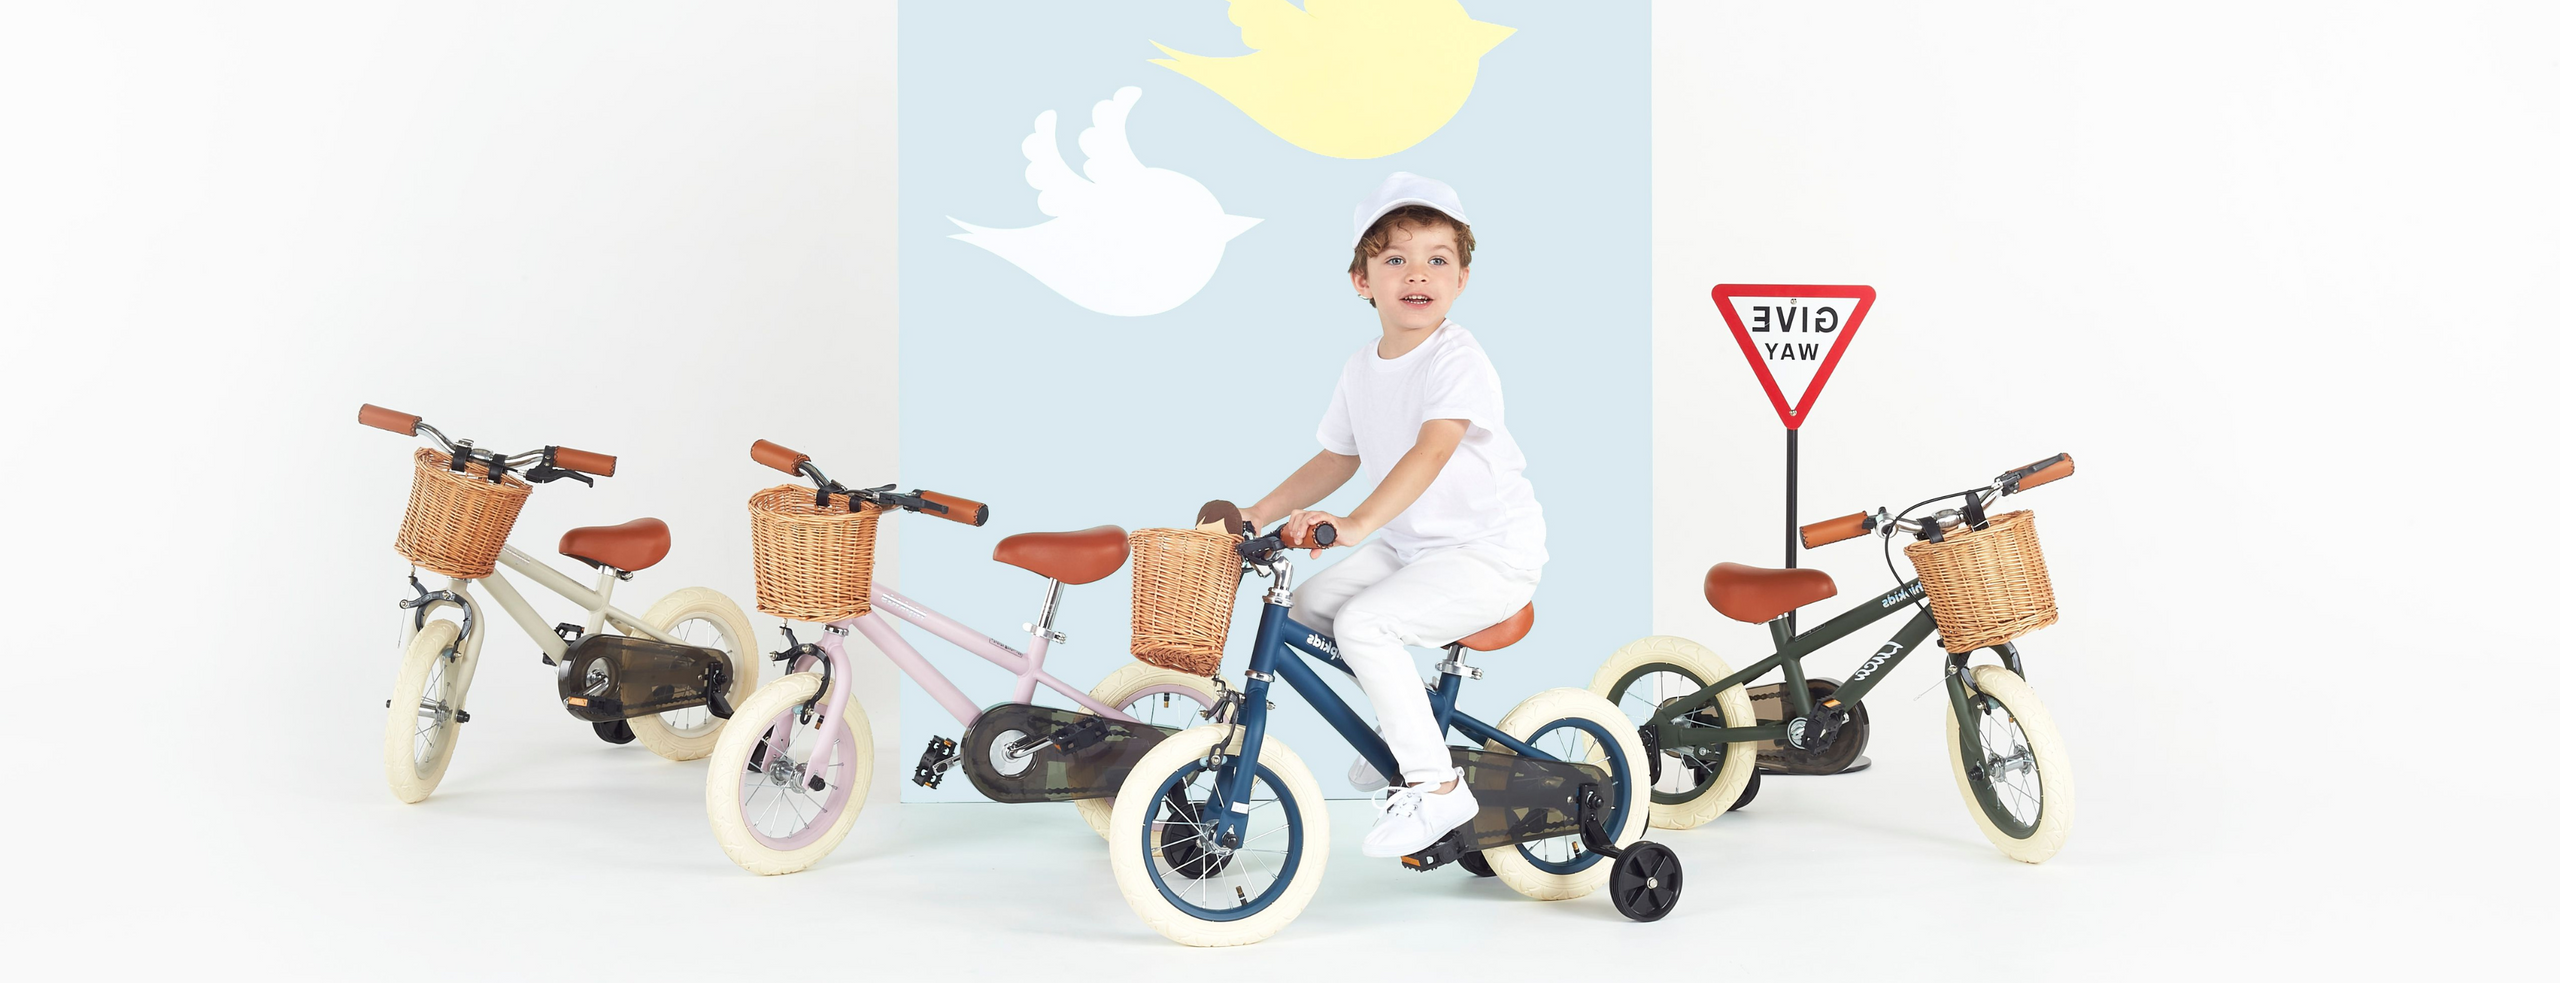 HipKids Kids Bike Size Guide for Toddlers and Children